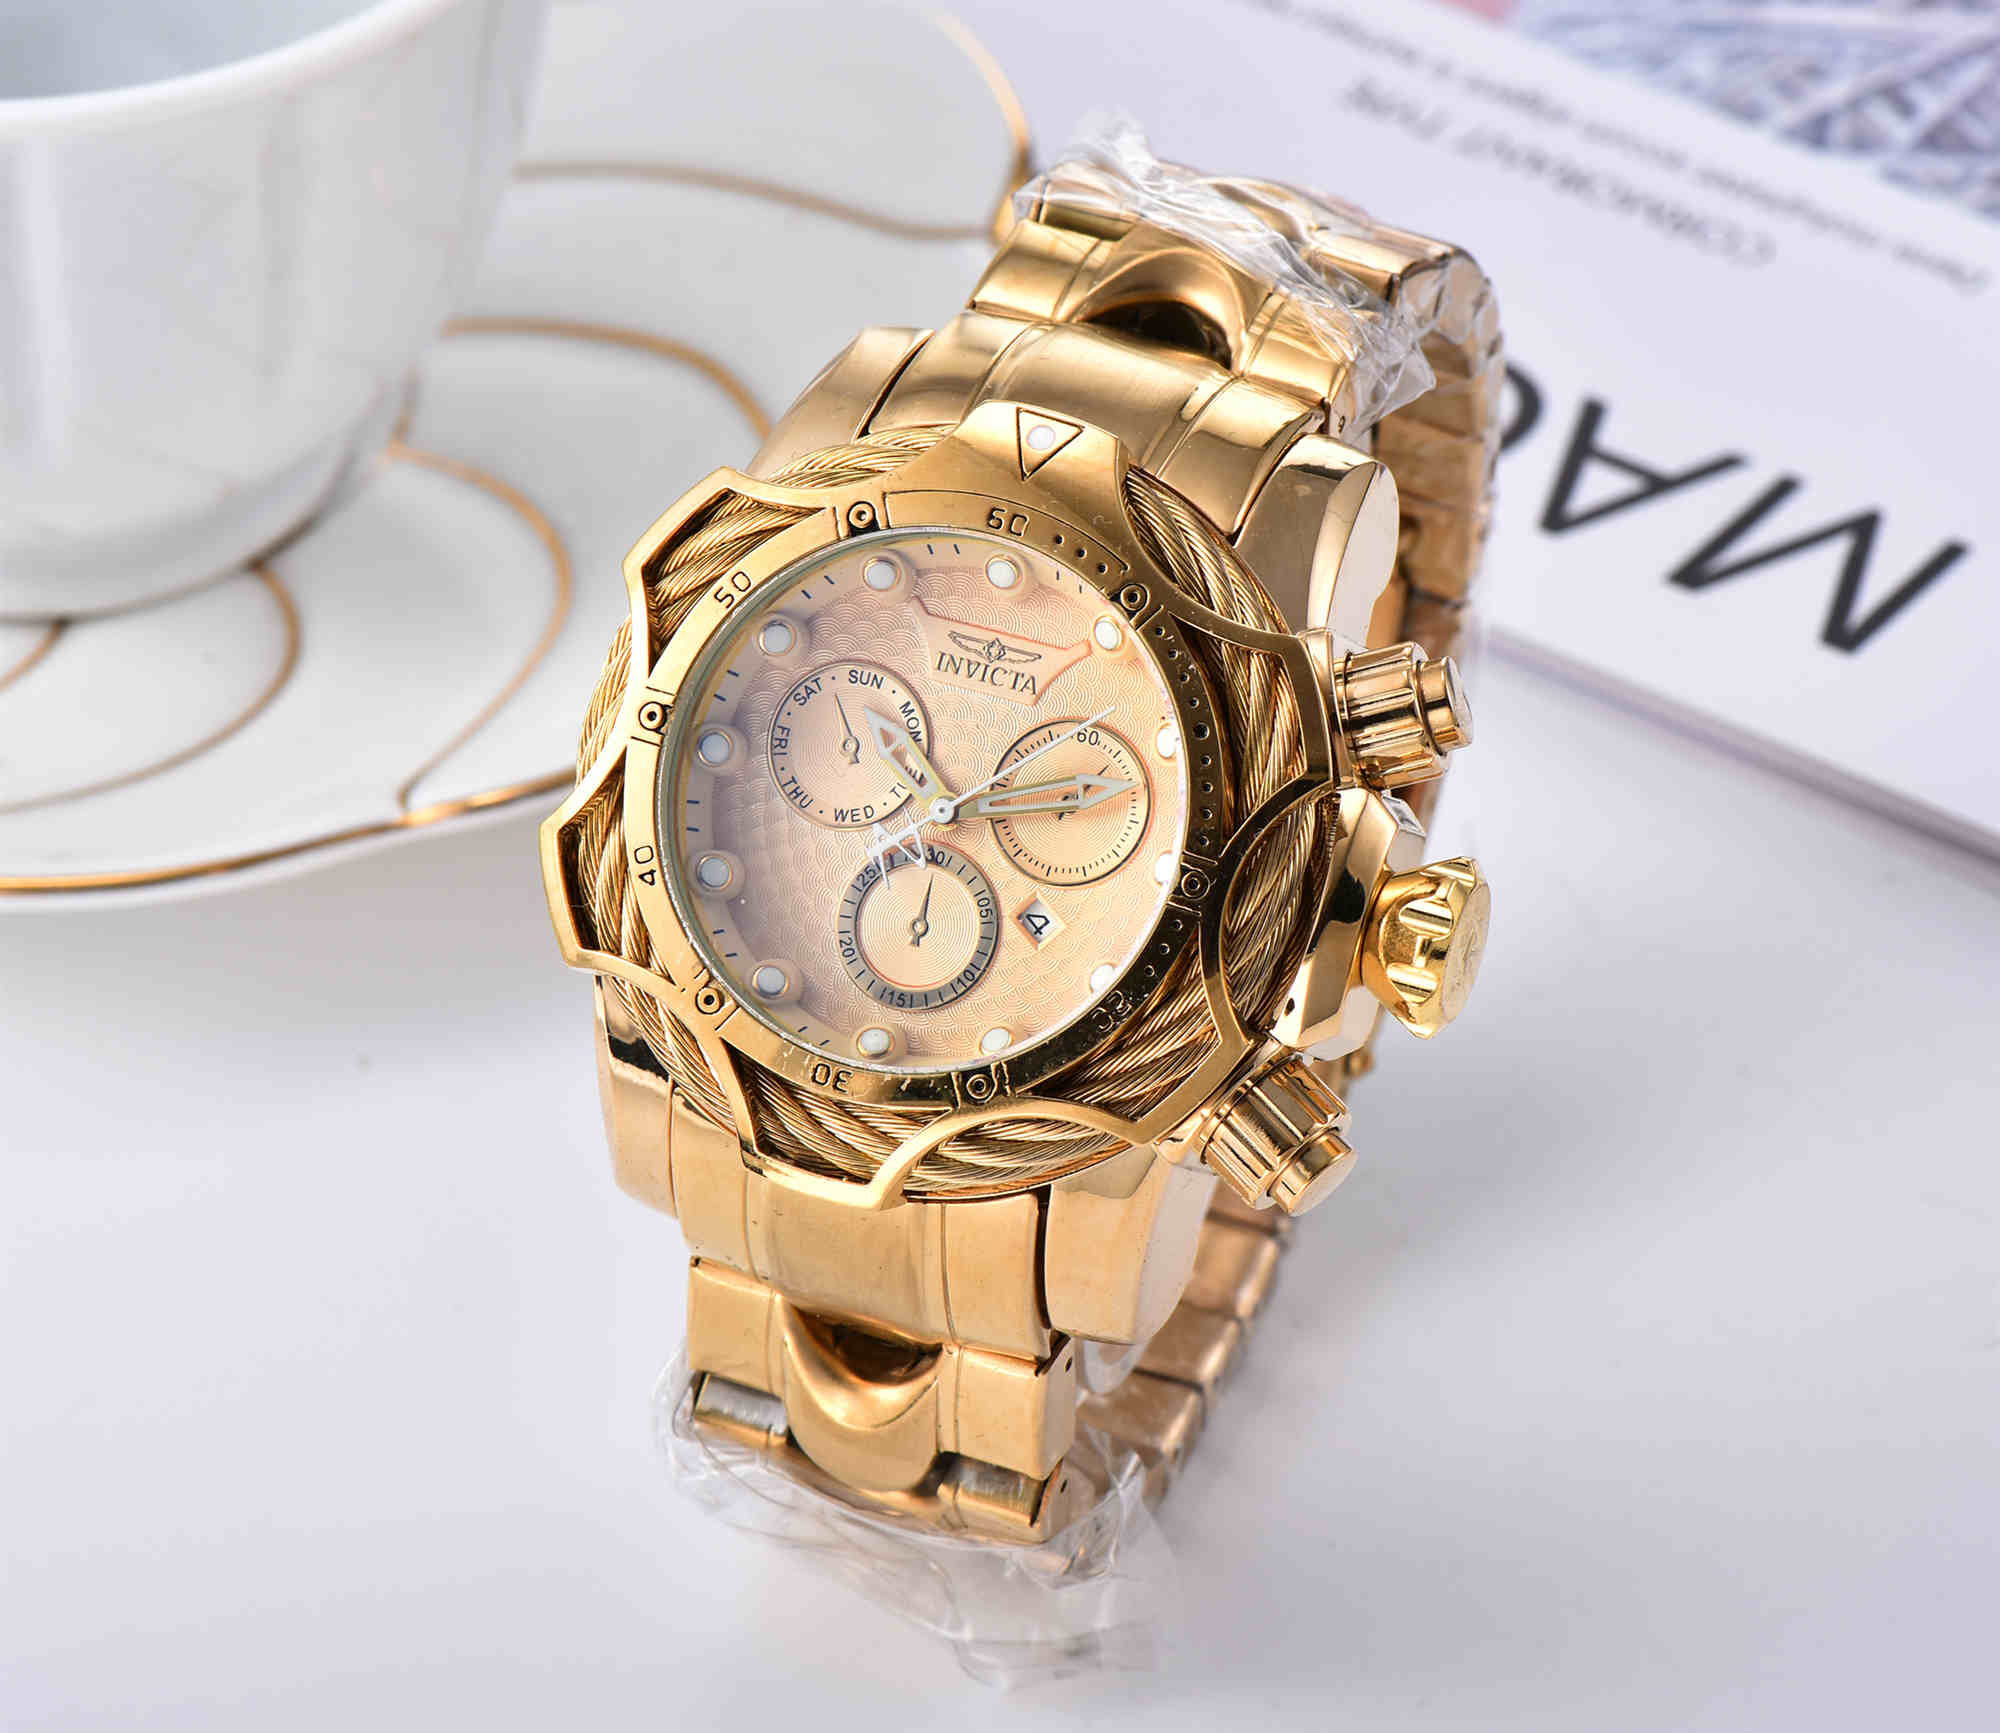 

2020 Hot Selling INVICTA Brand Watches Mens Watch Classic Style Large Dial Auto Date Fashion Rose Gold Watch relojes de marca, Brown